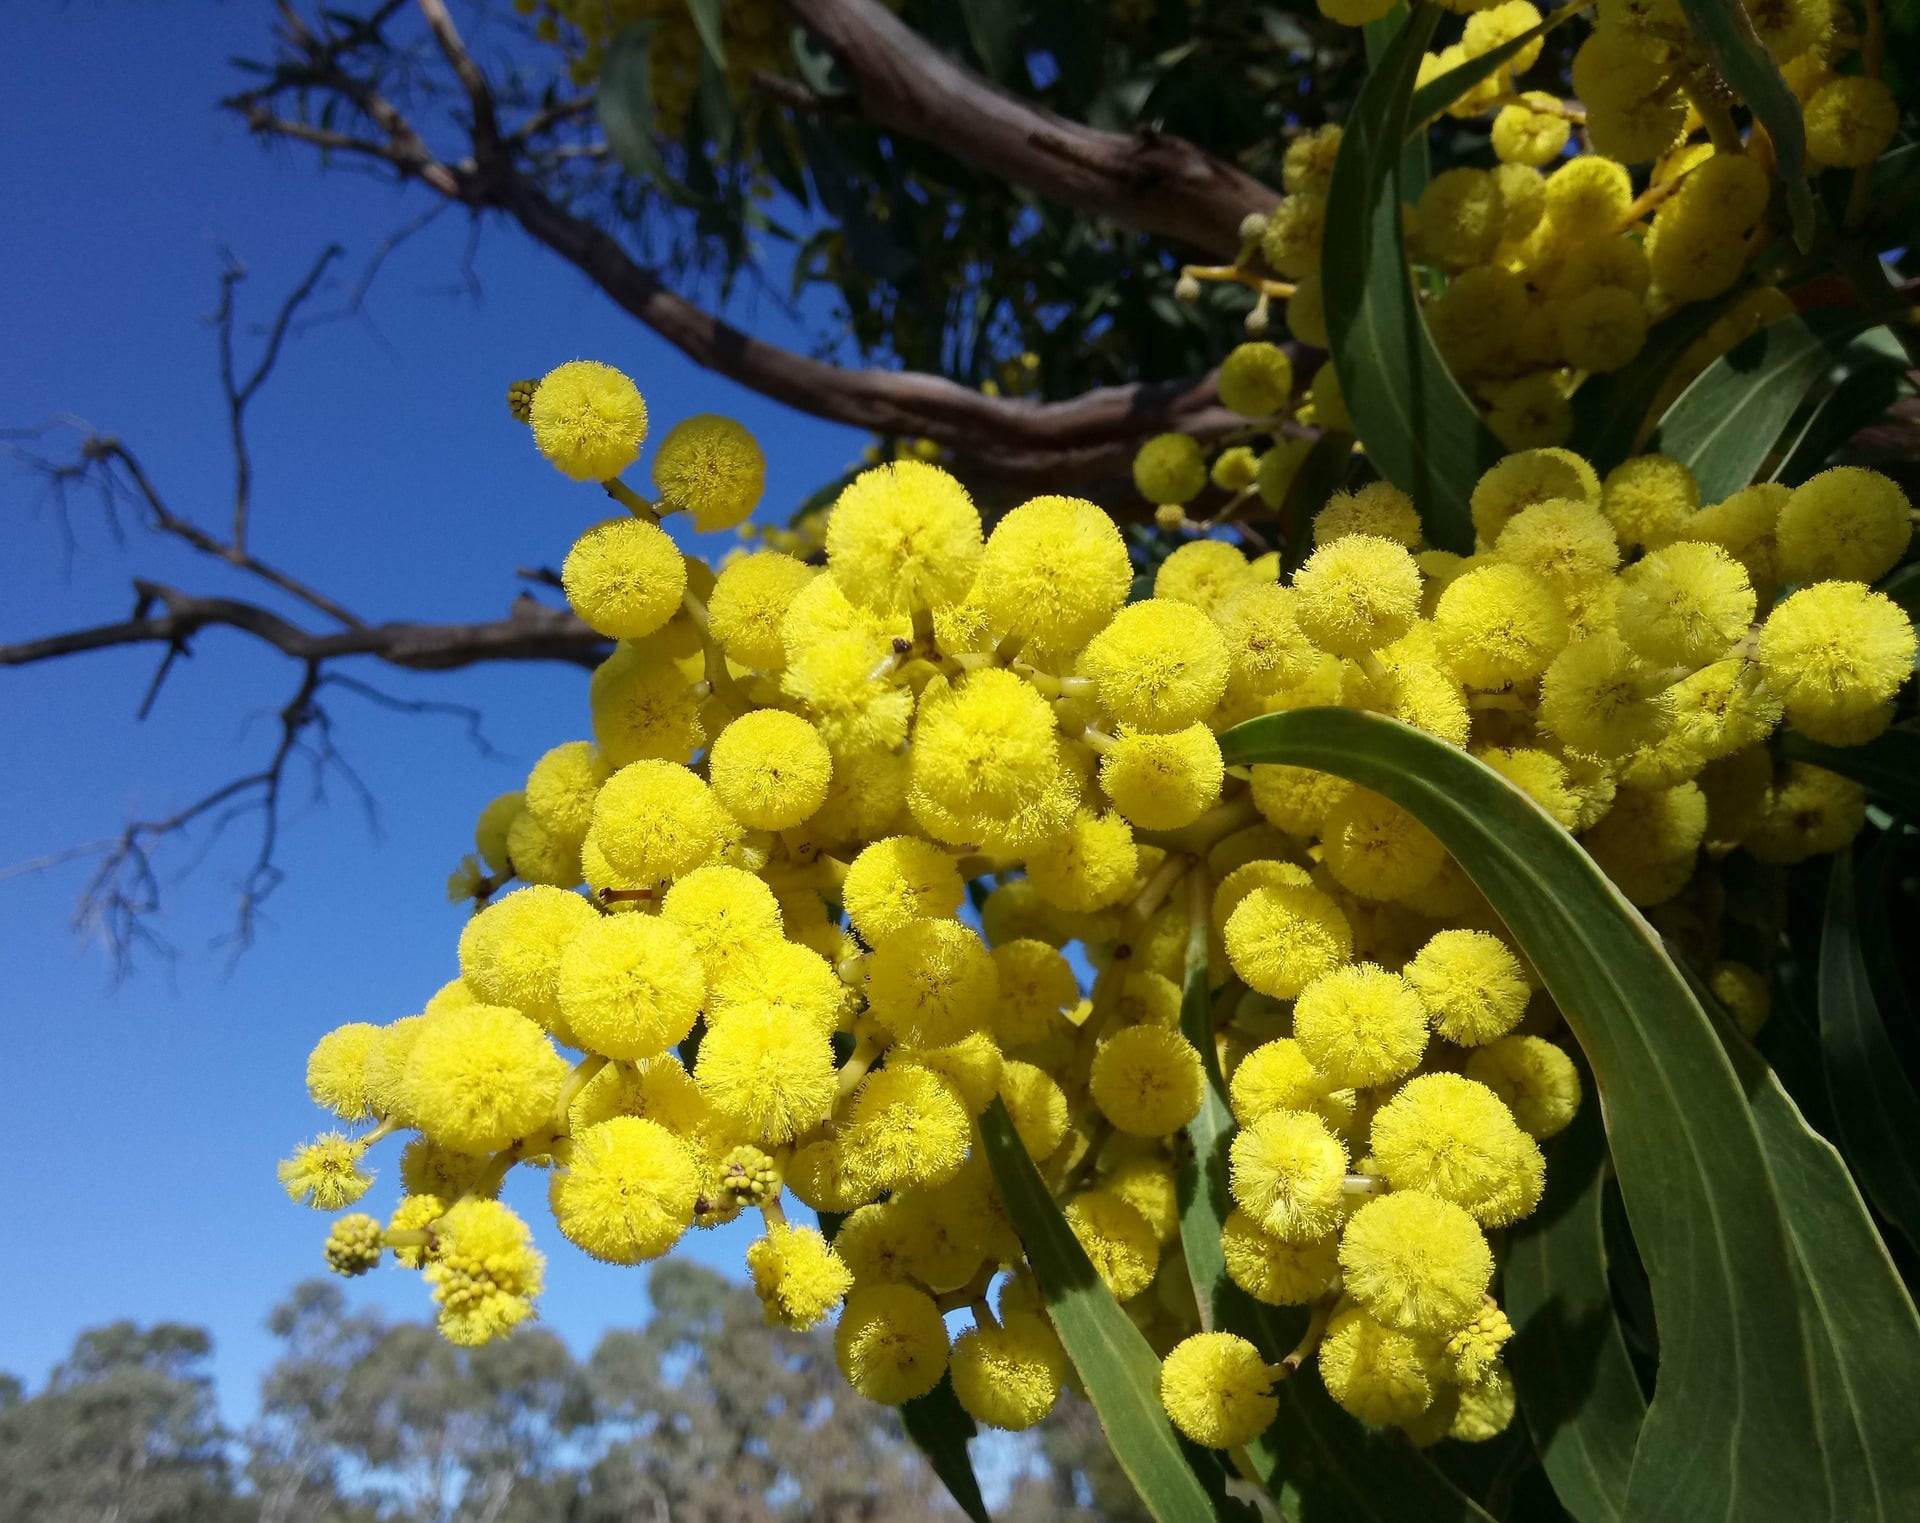 Make Your Eco-Garden Gorgeous with these Water-Saving Plants - Gold Dust Wattle, Australian Outdoor Living.